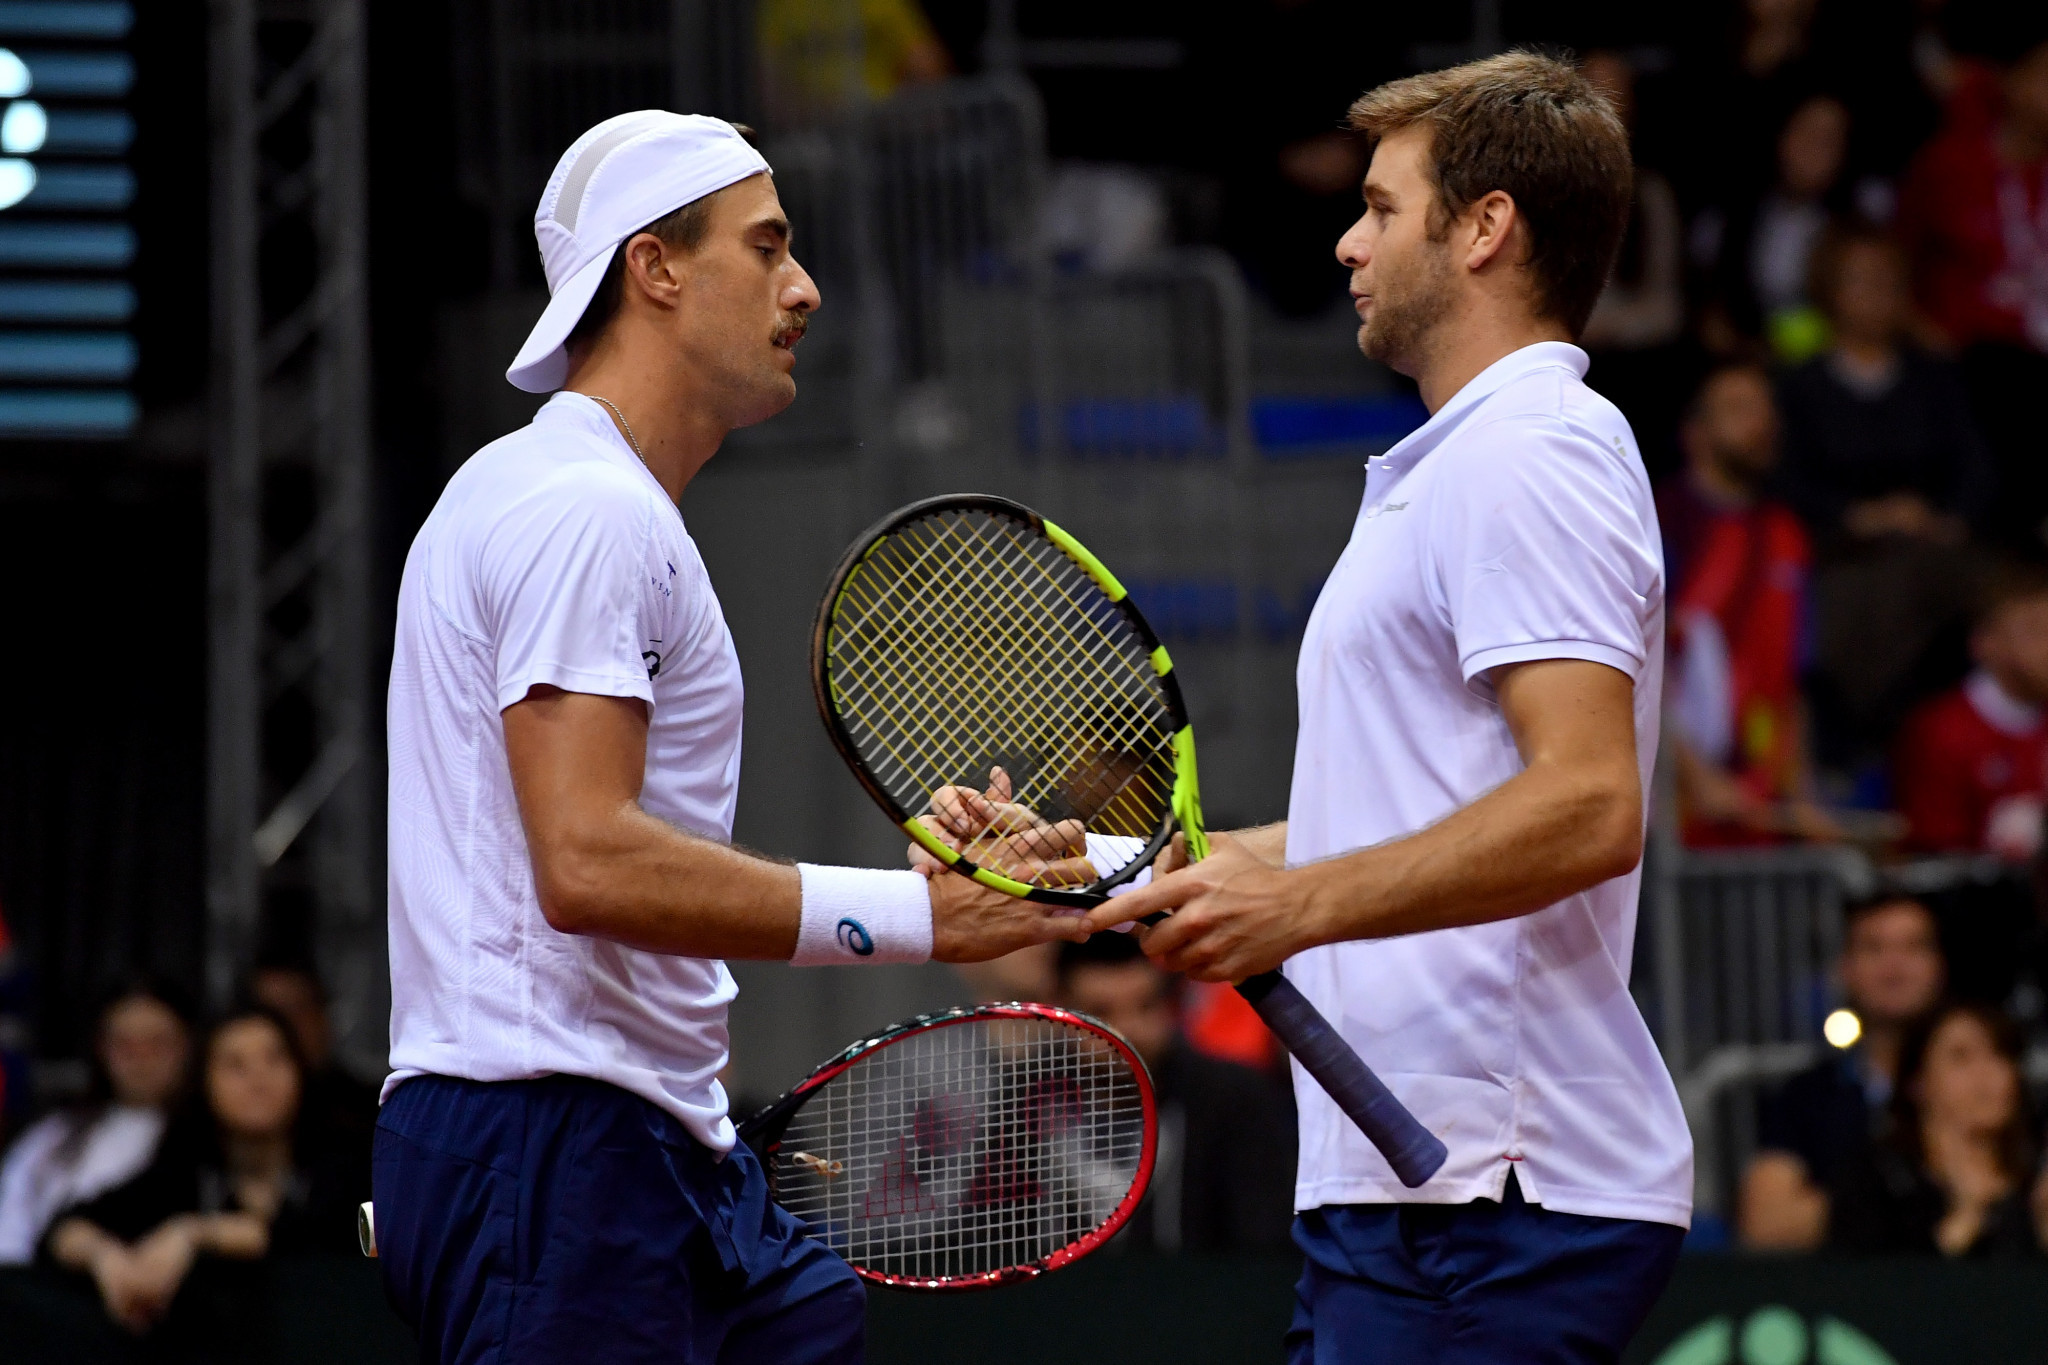 Ryan Harrison and Steve Johnson clinched victory for the United States against Serbia ©Getty Images 